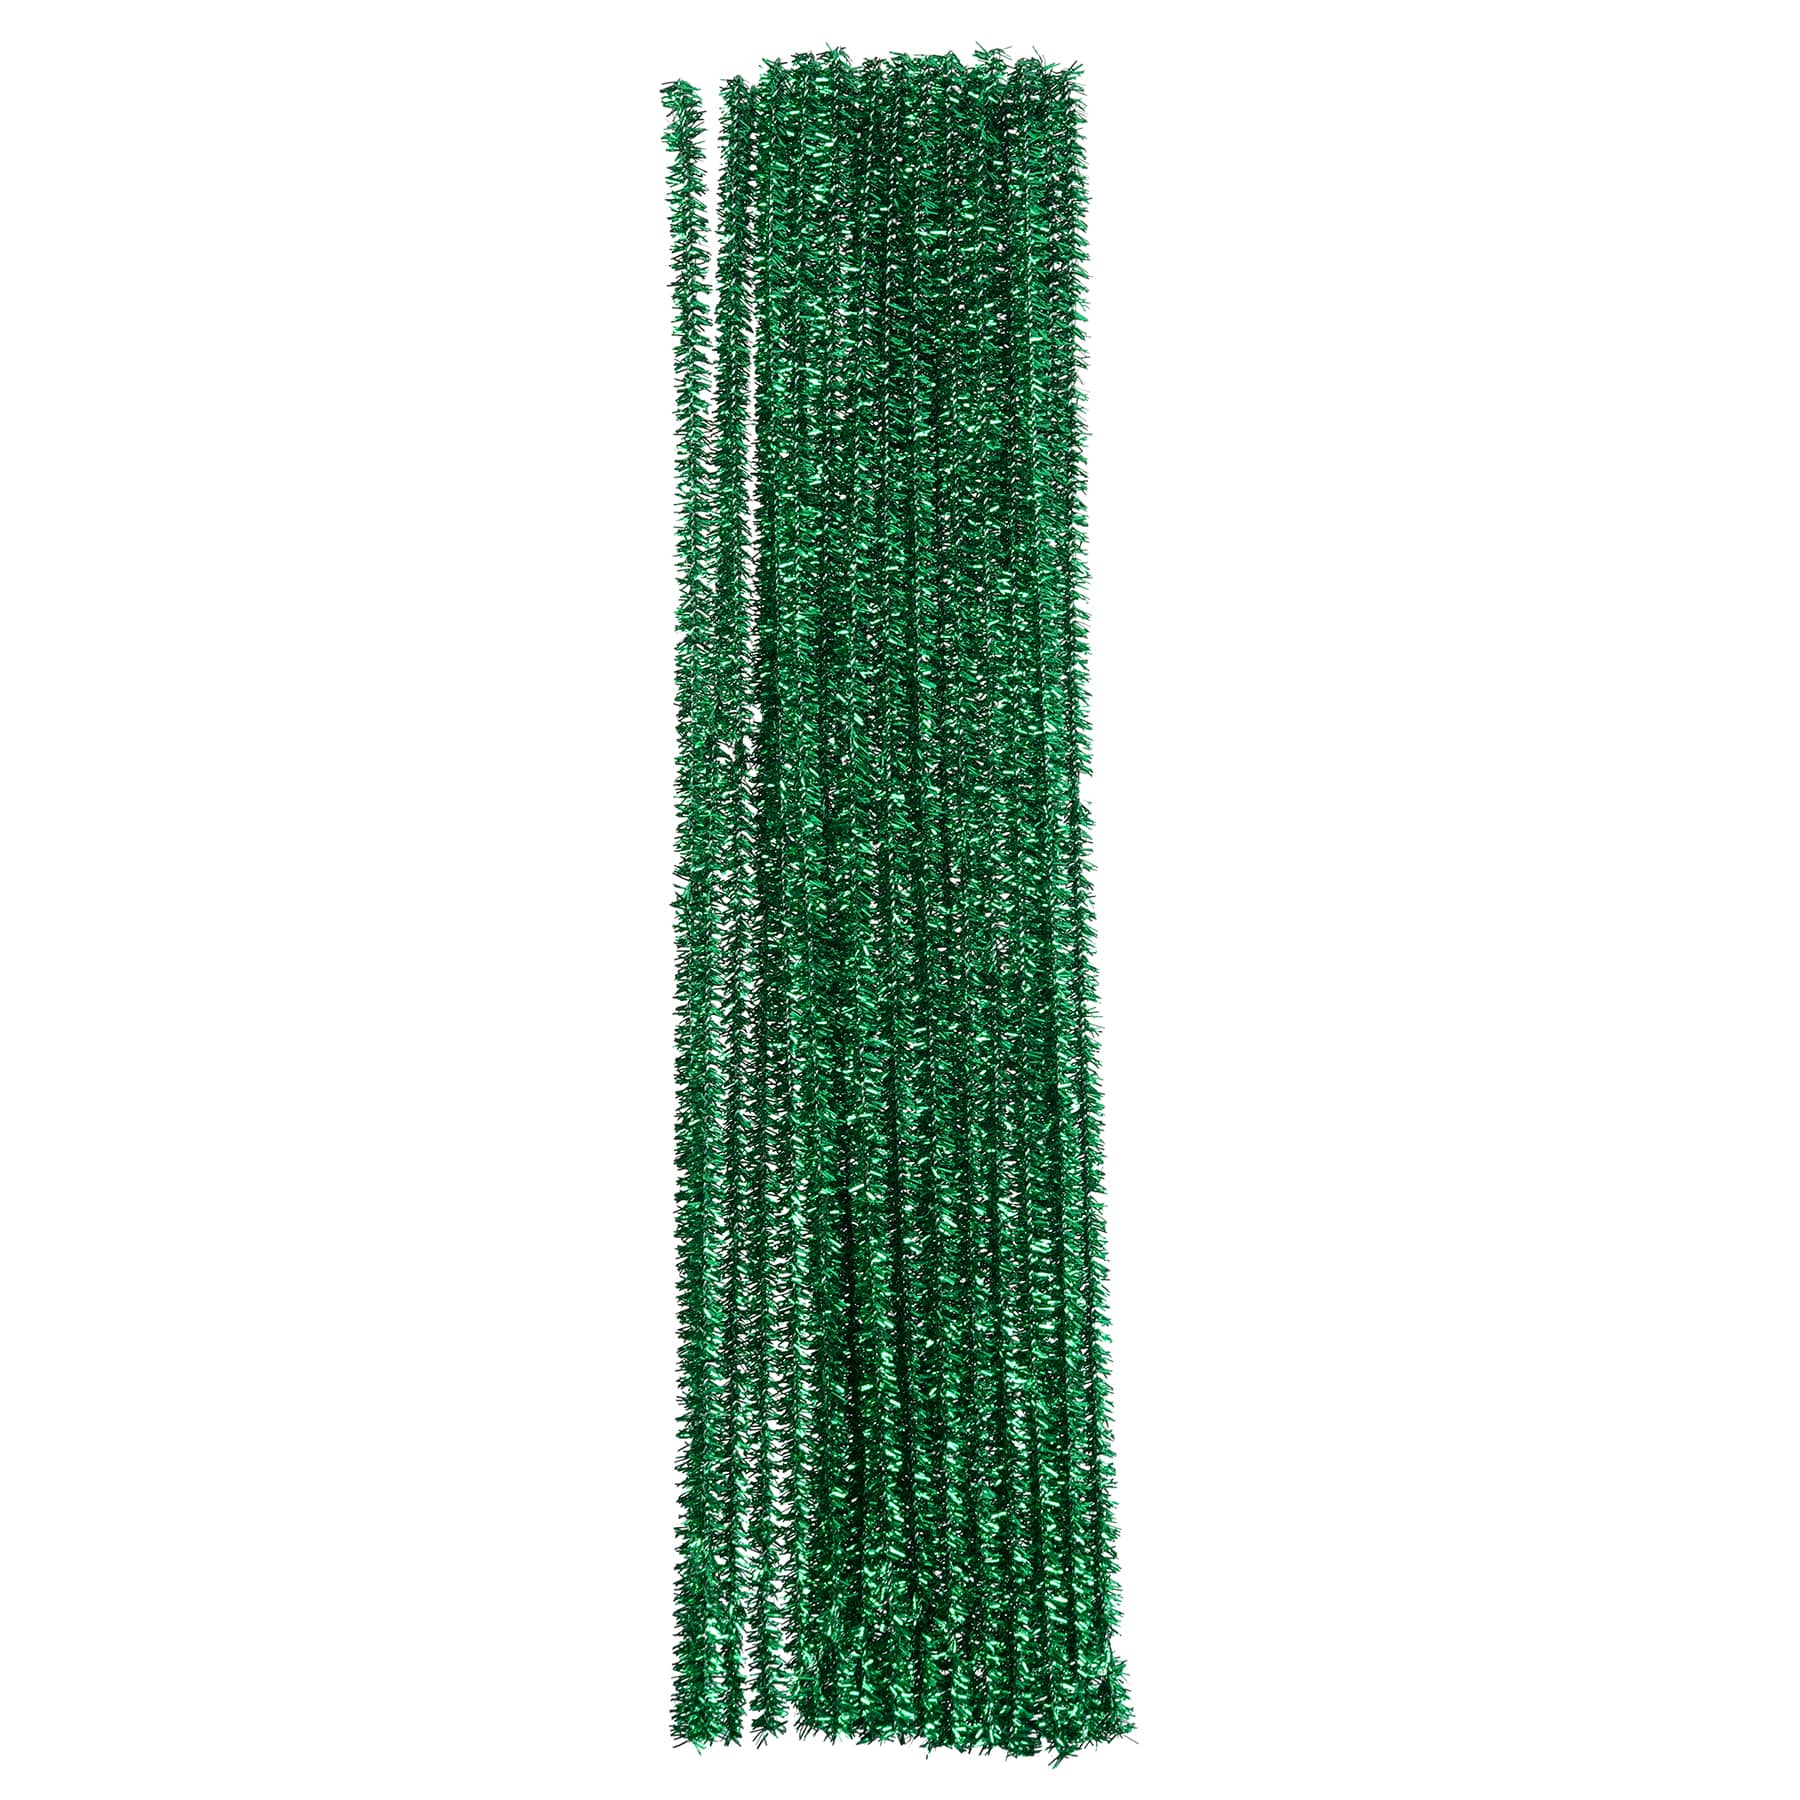 Chenille Pipe Cleaners, 25ct. by Creatology™